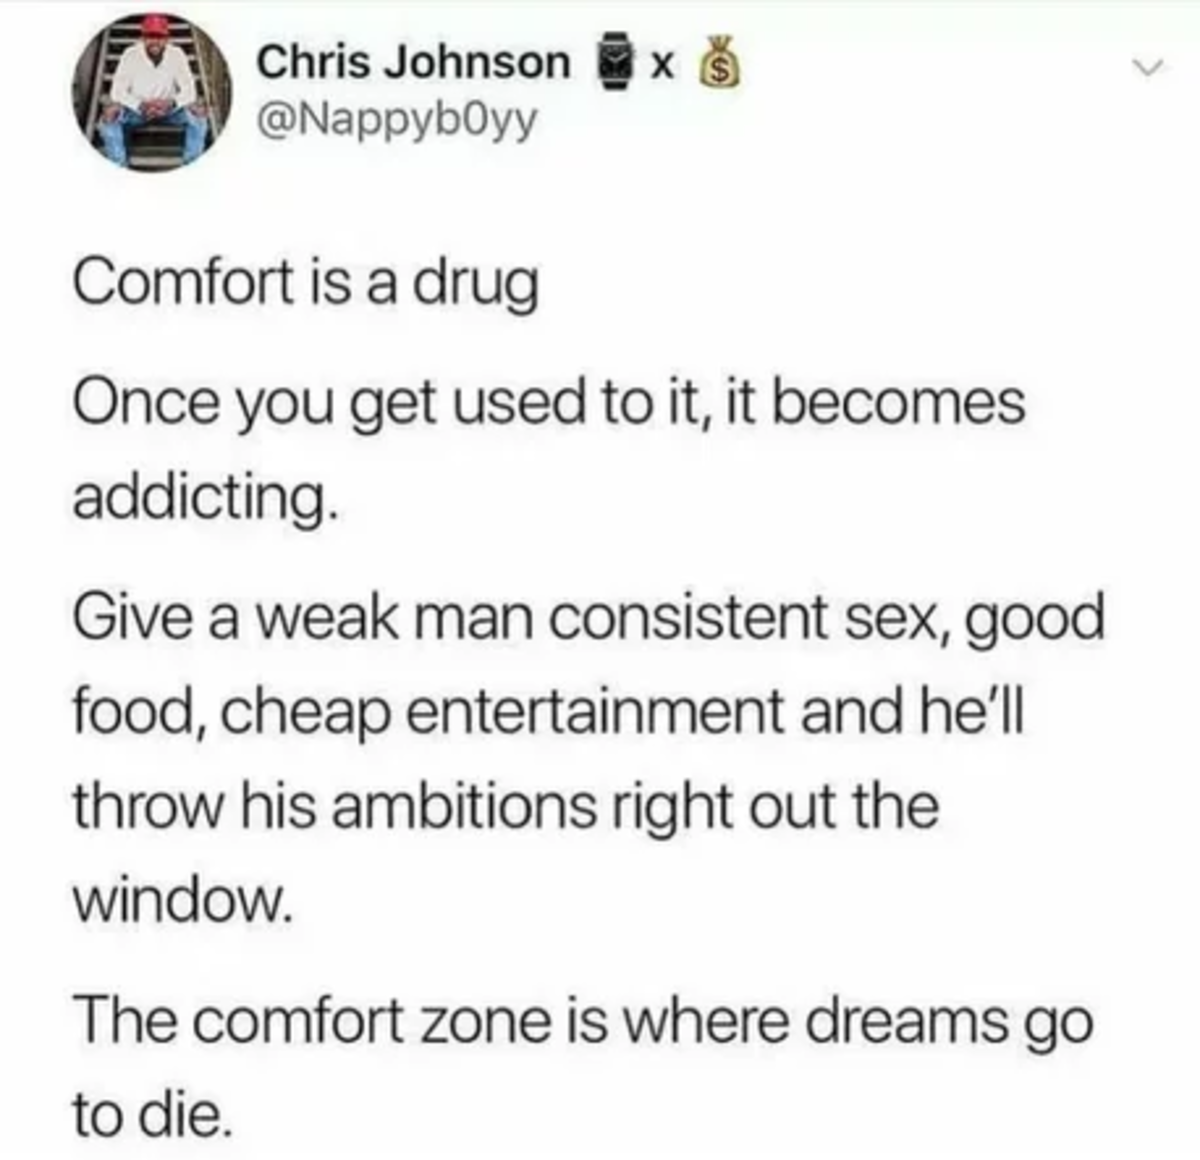 random pics - document - Chris Johnson x Comfort is a drug Once you get used to it, it becomes addicting. Give a weak man consistent sex, good food, cheap entertainment and he'll throw his ambitions right out the window. The comfort zone is where dreams g